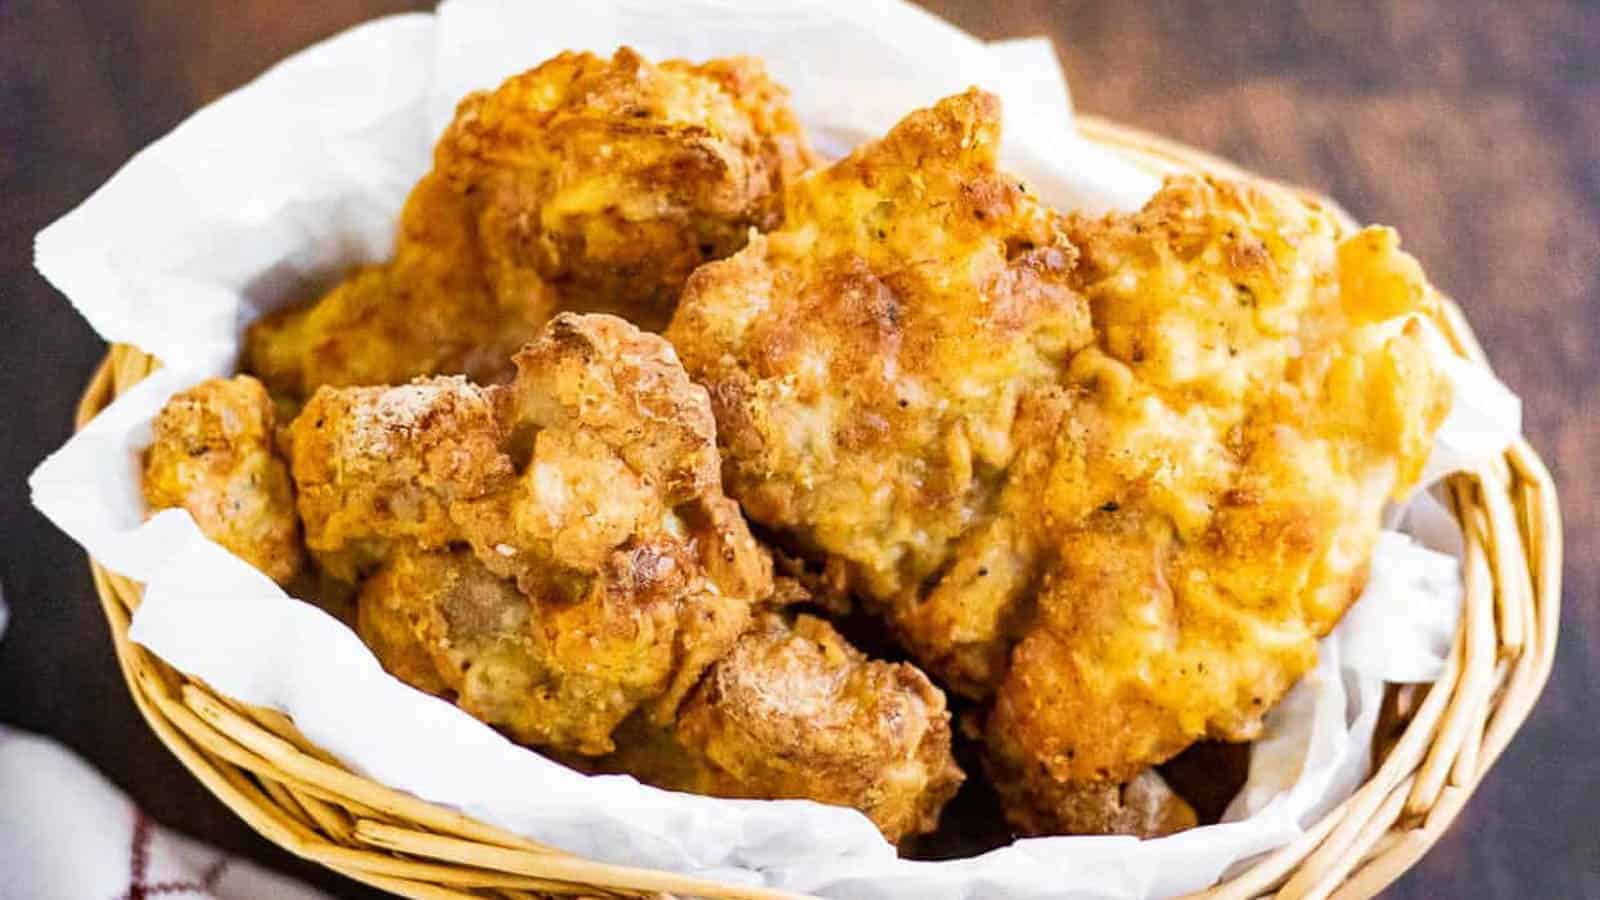 Check Out Our 17 All-Time Favorite Air Fryer Recipes